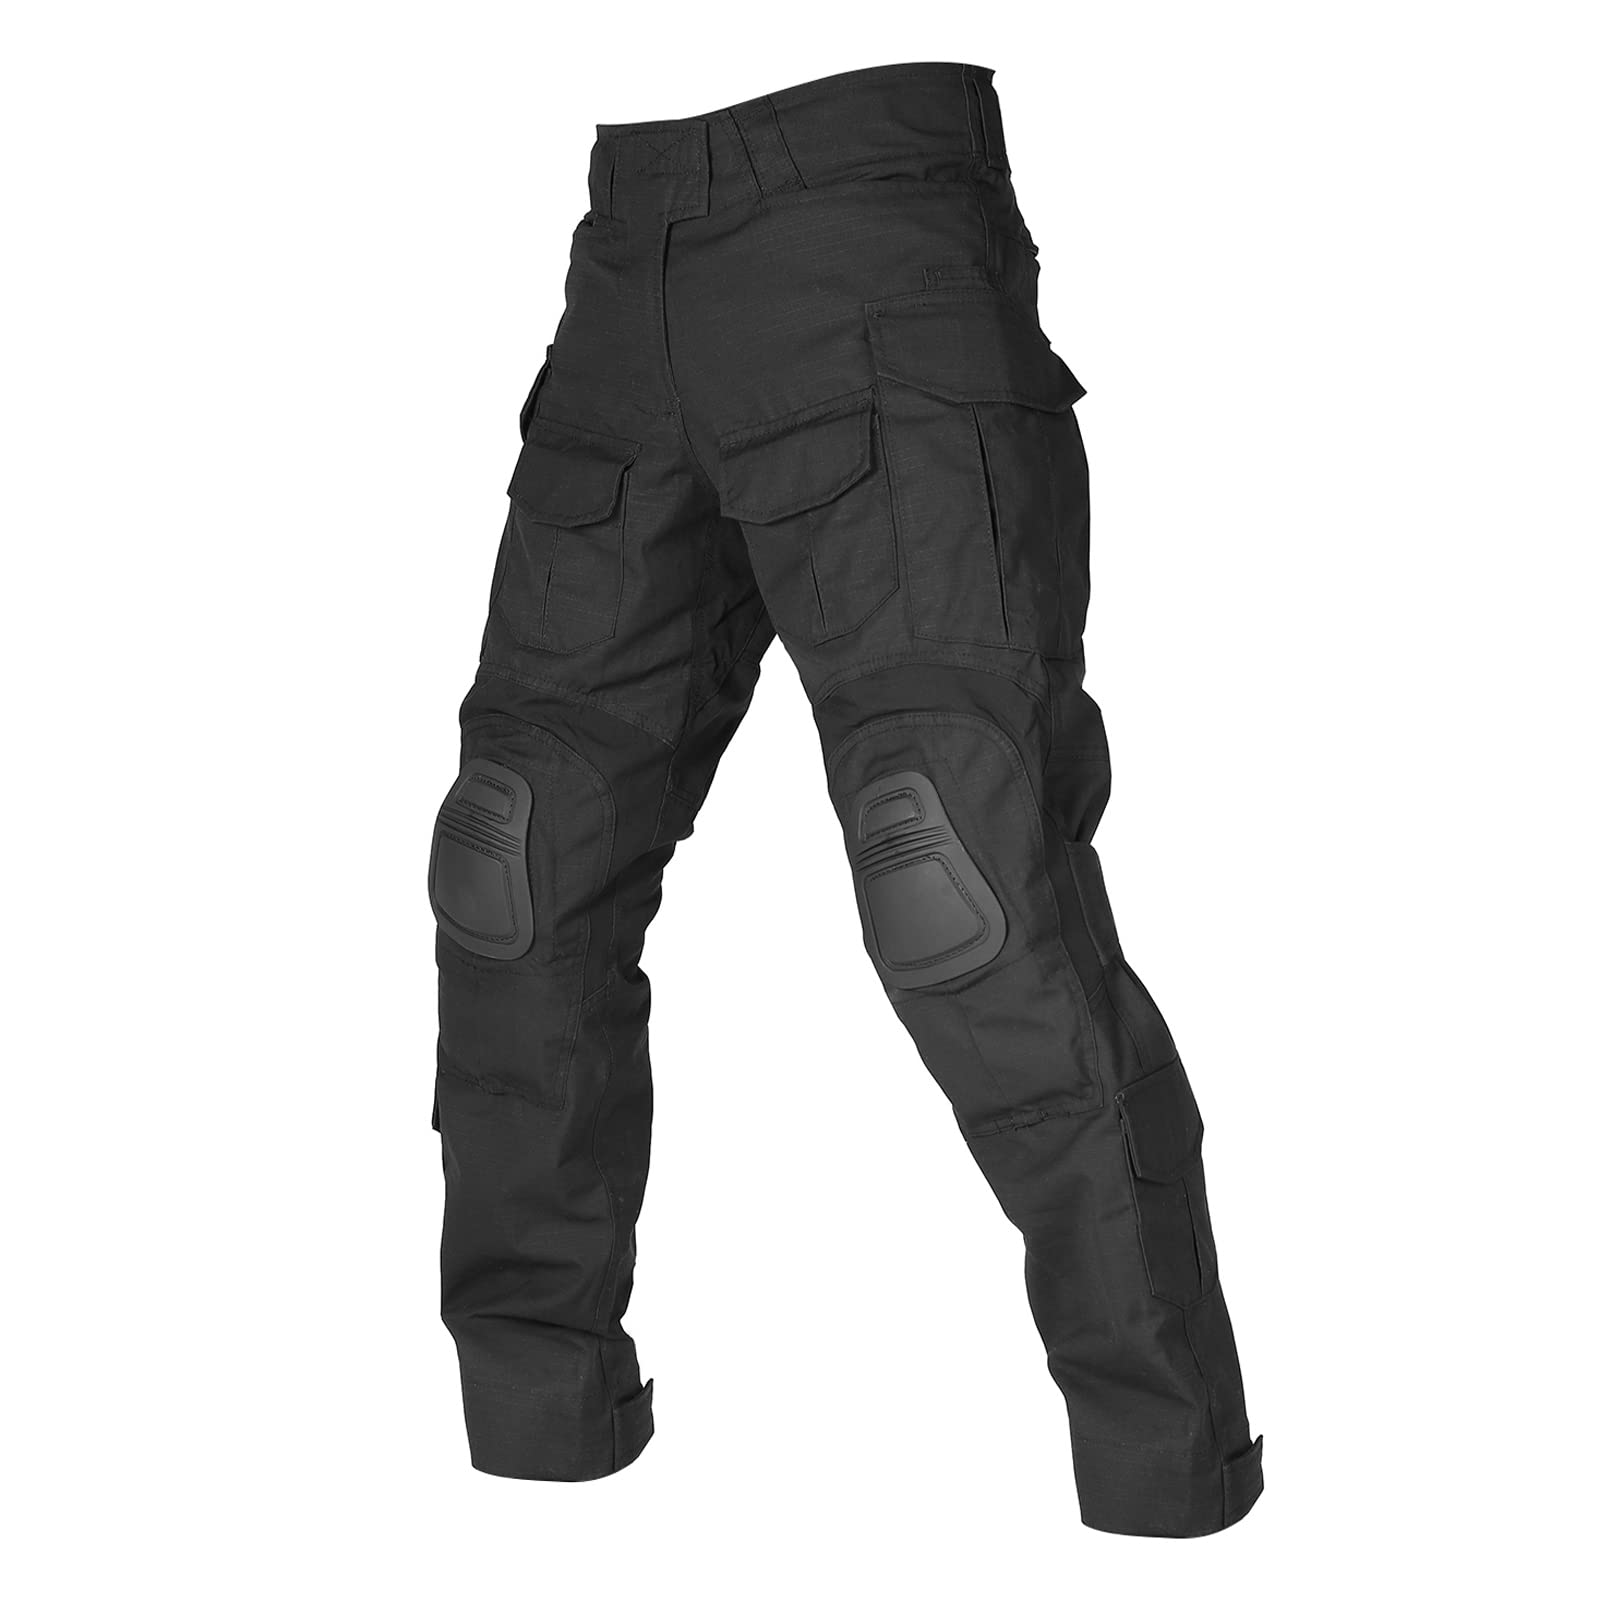 VOTAGOO Combat Pants with Knee Pads, G3 Hunting Multicam Pants for Men  Tactical Military Paintball Trousers Airsoft Gear Black X-Large